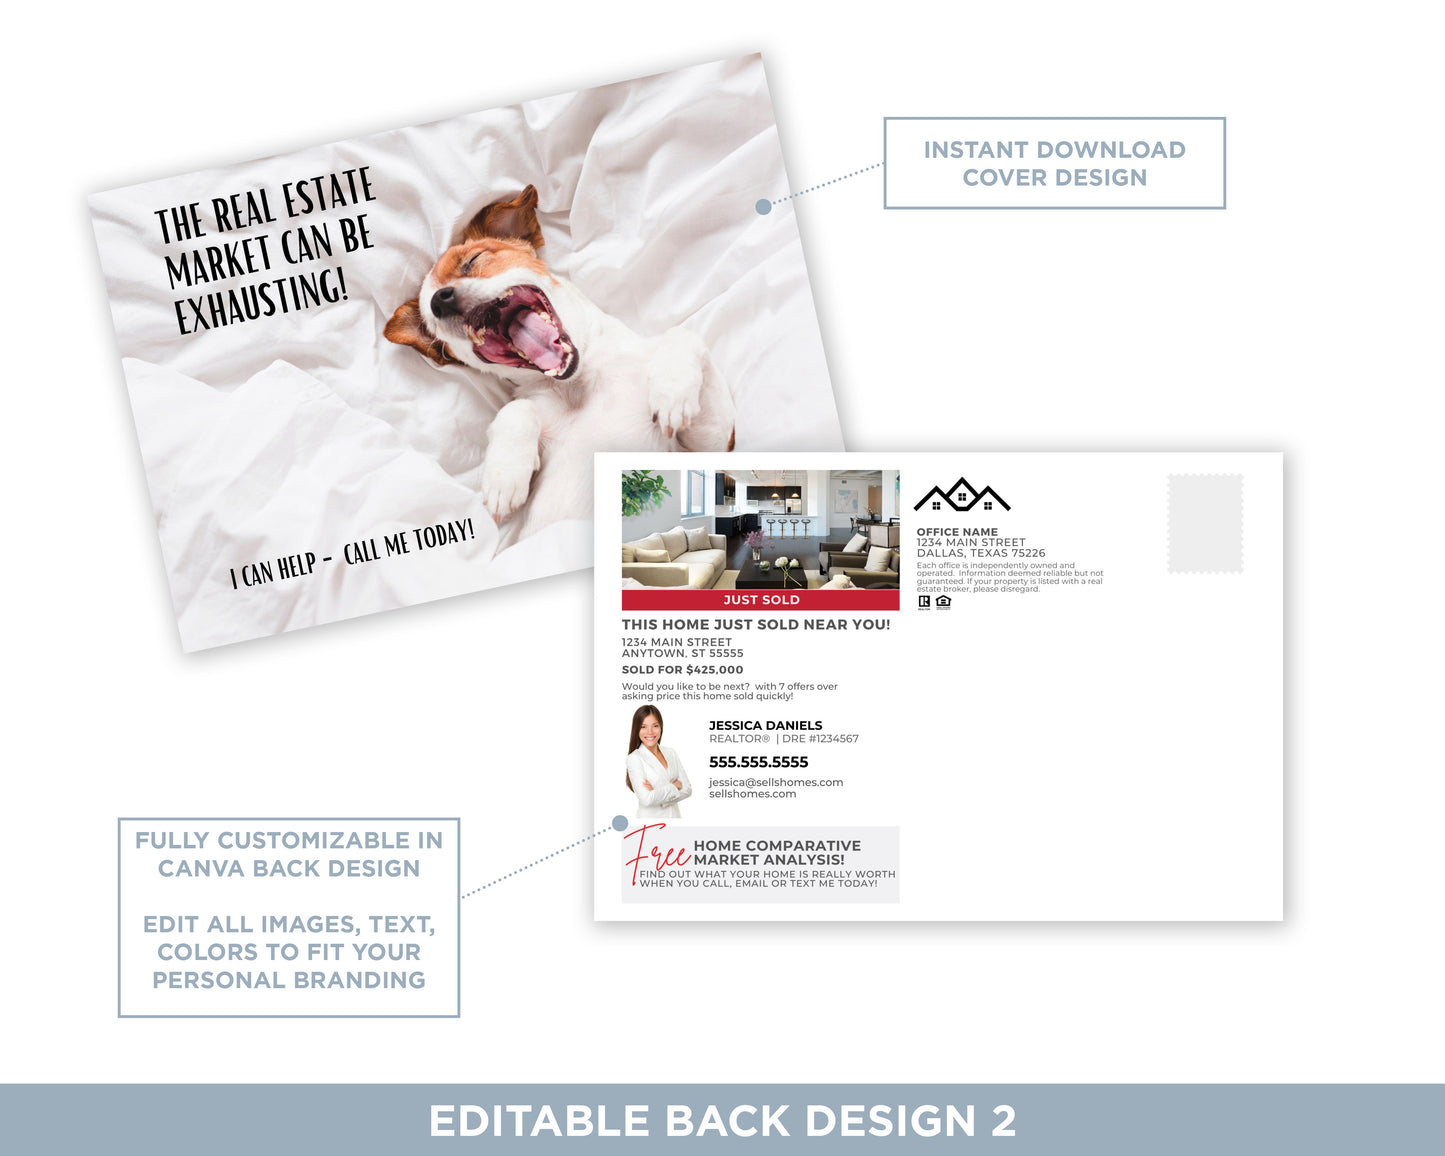 Real Estate Market Can Be Exhausting | Funny Real Estate Postcard Download